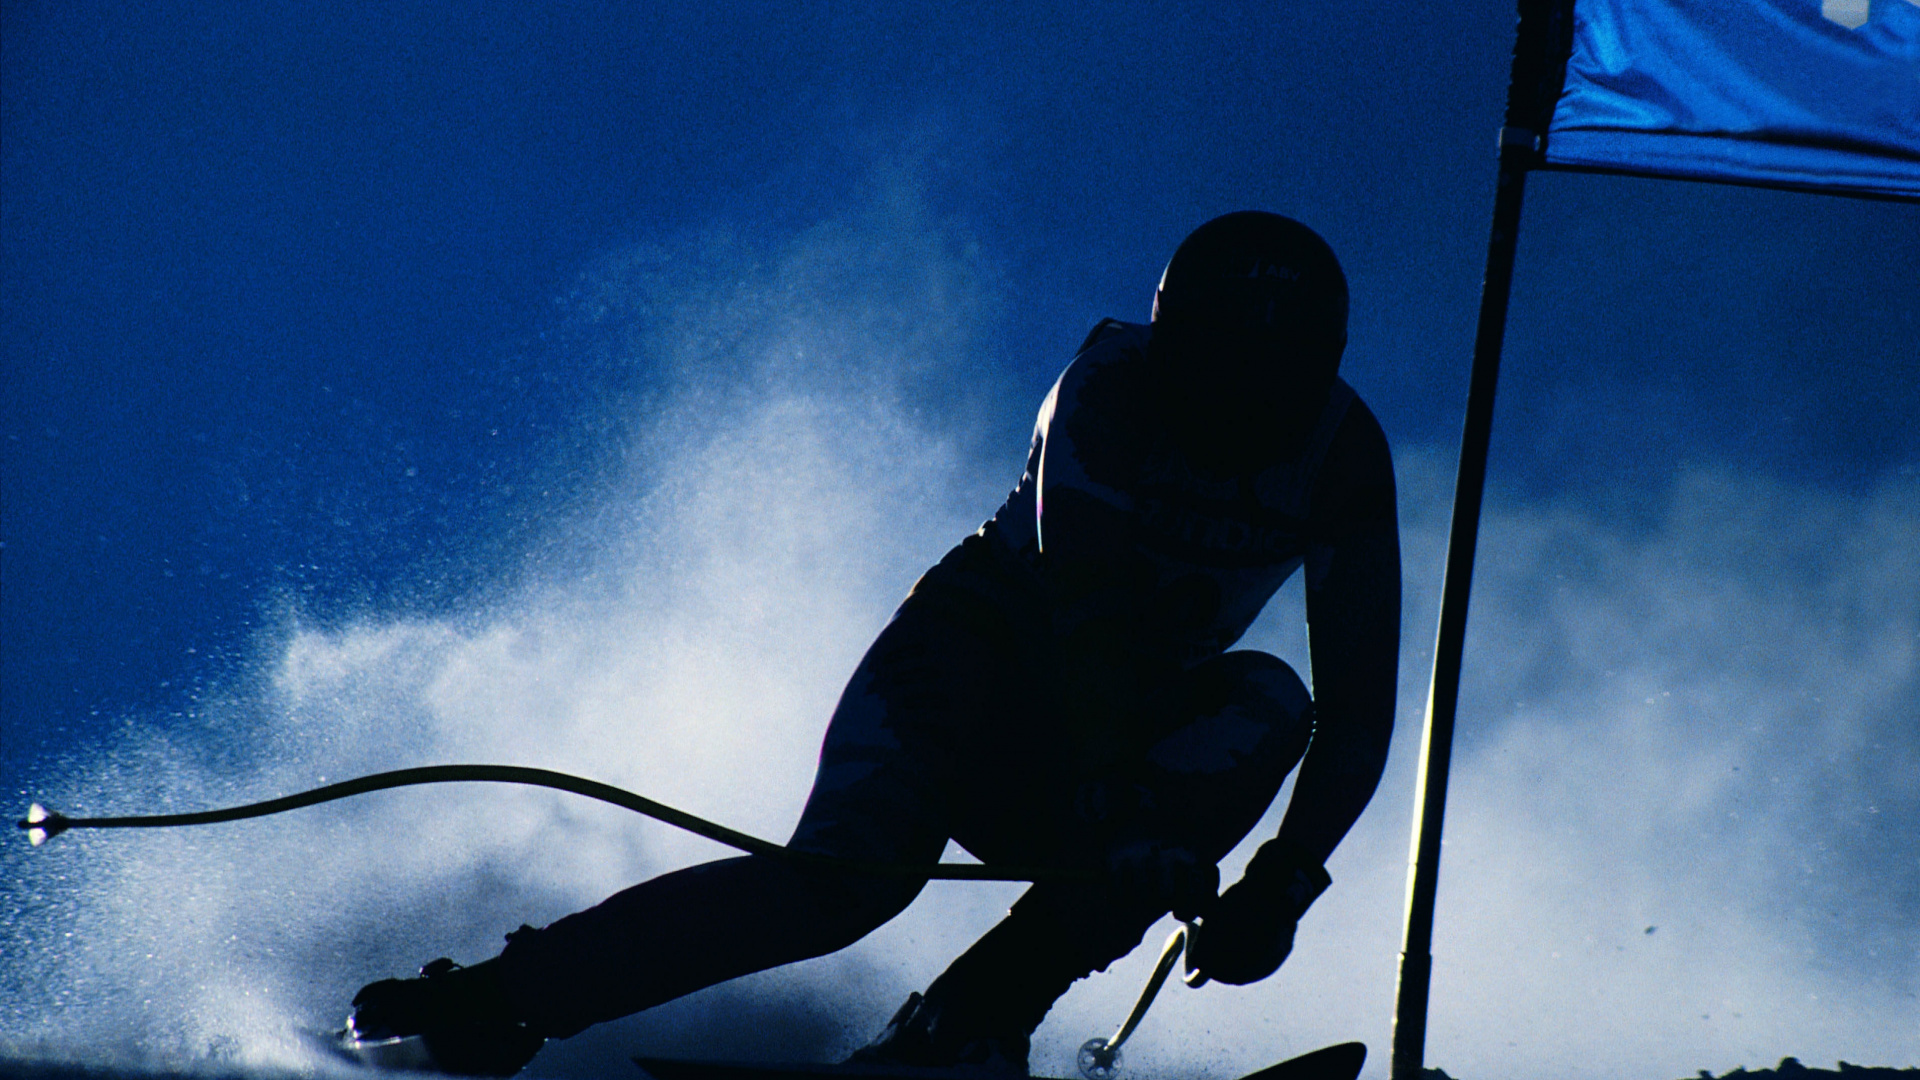 Silhouette of Man Riding Ski Blades Under Blue Sky. Wallpaper in 1920x1080 Resolution